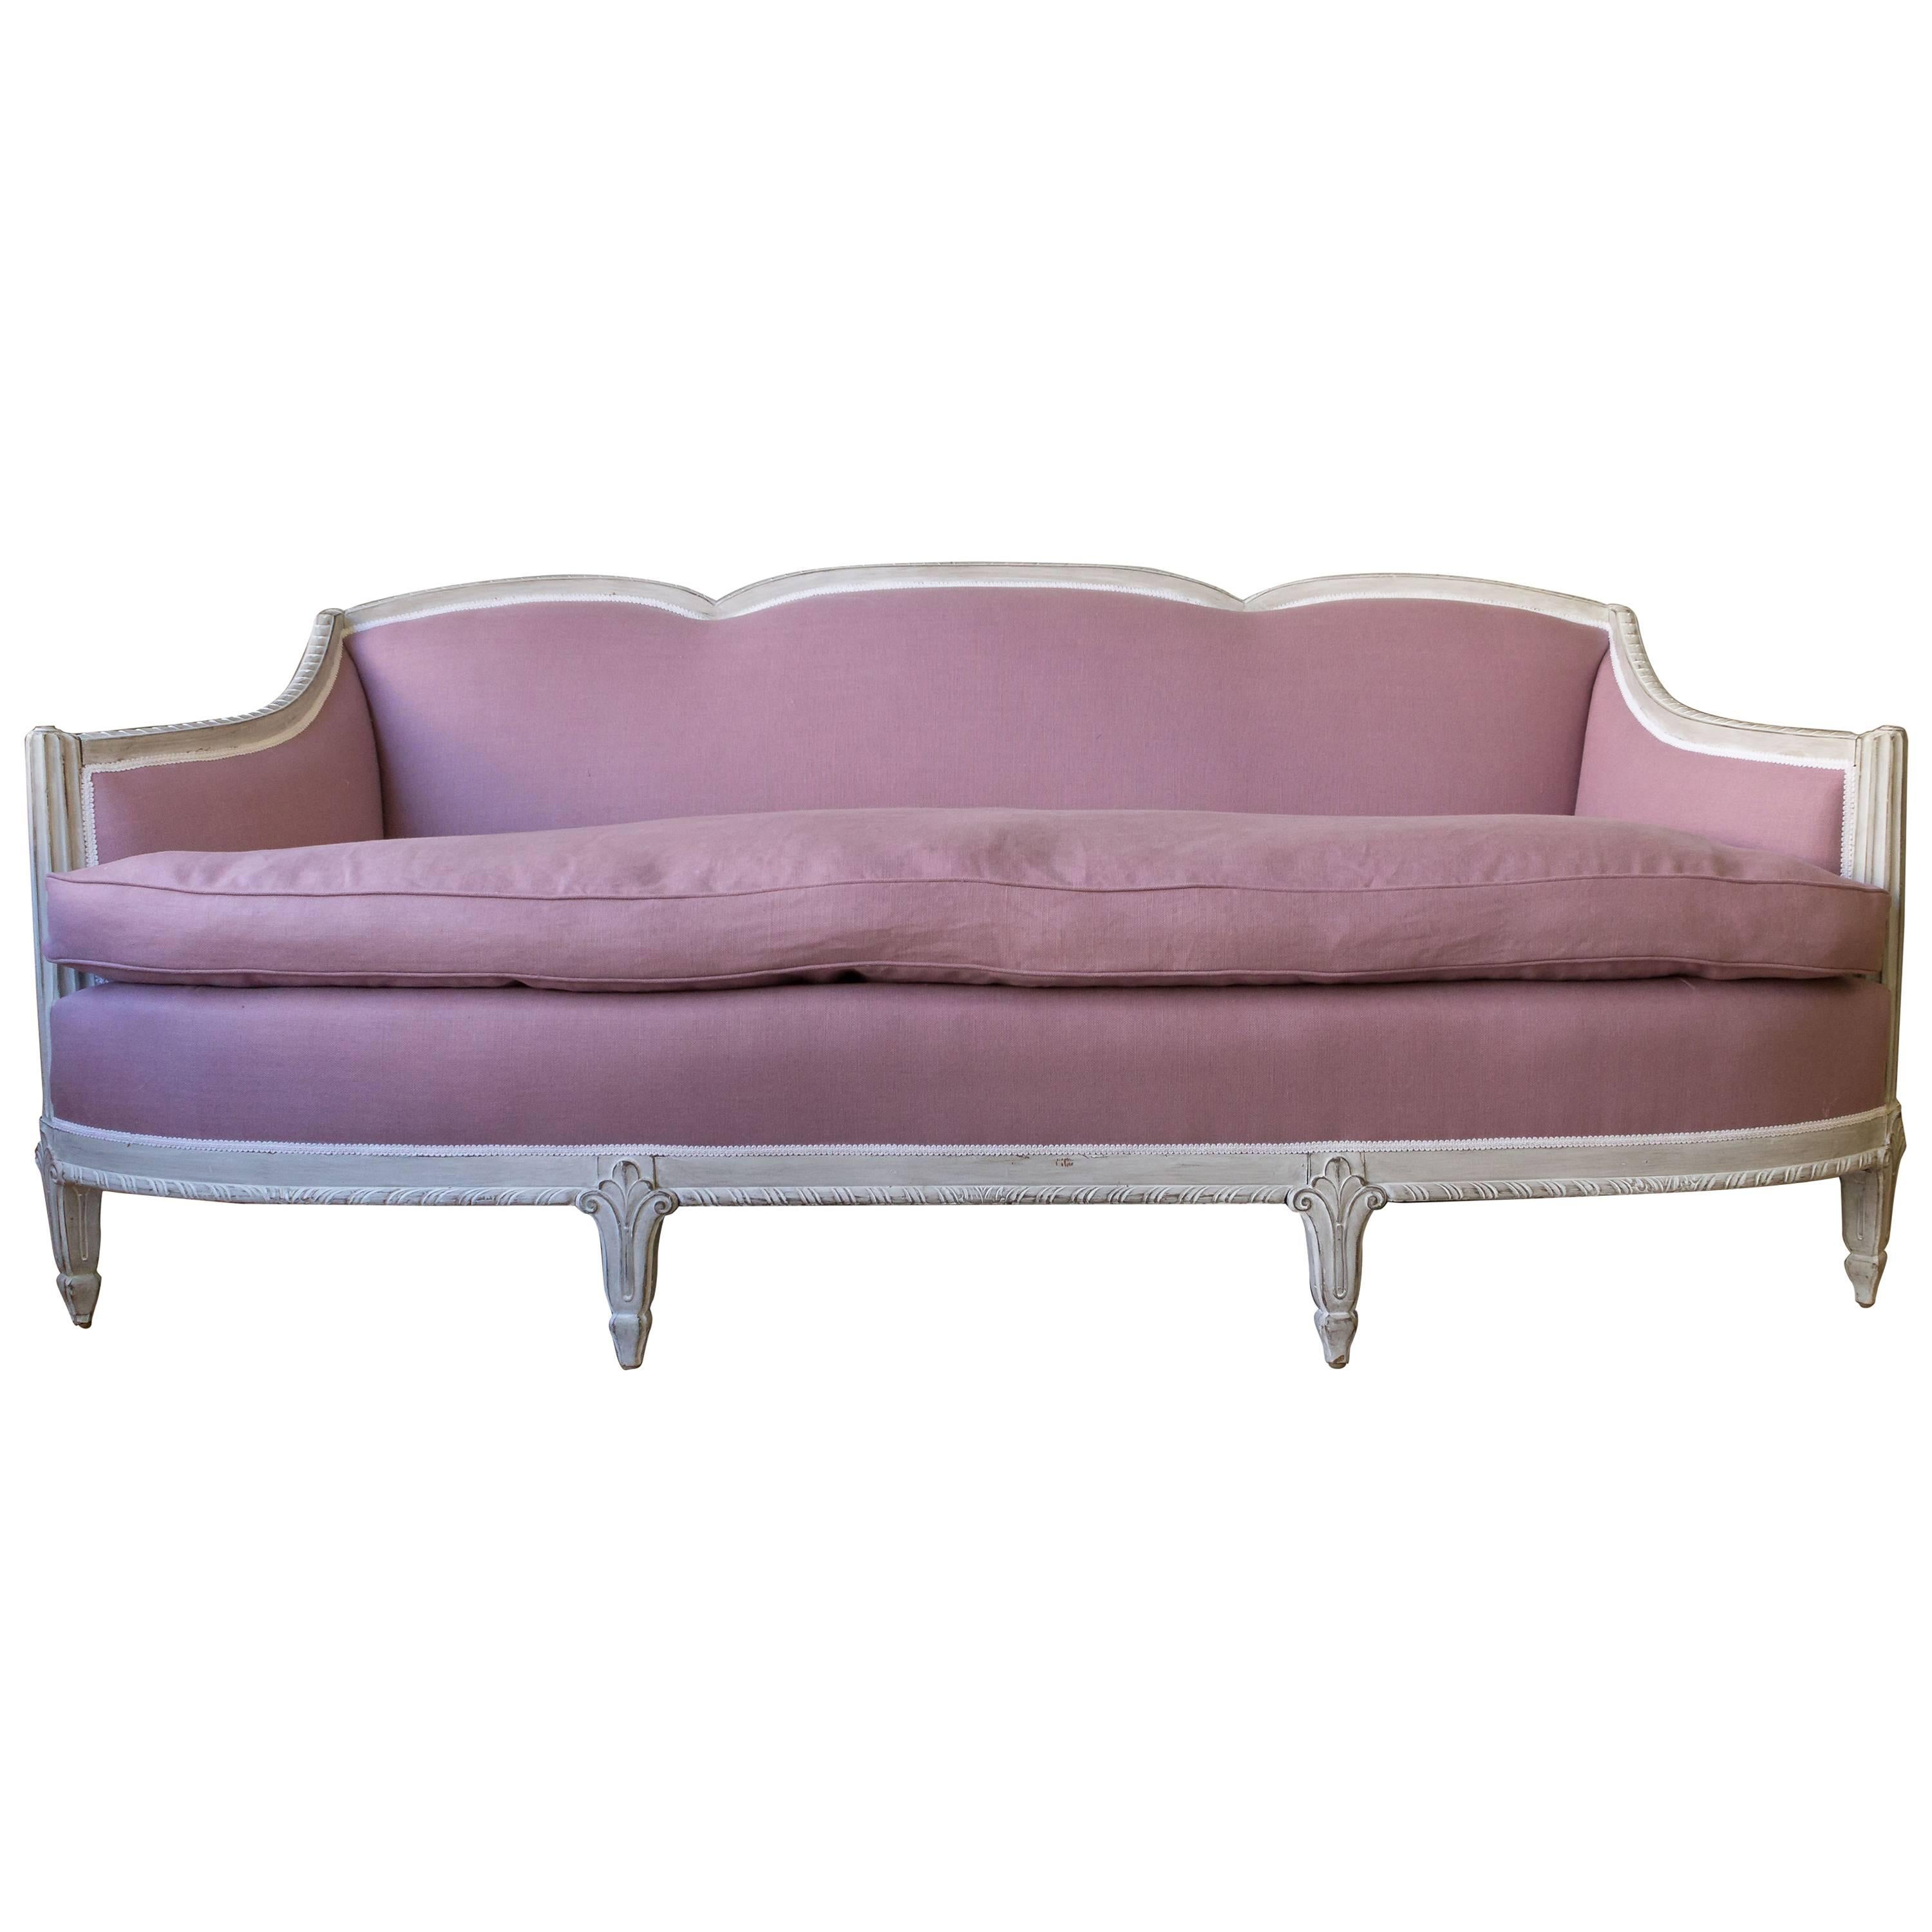 20th Century Art Deco Style Settee Upholstered in Lavender Linen